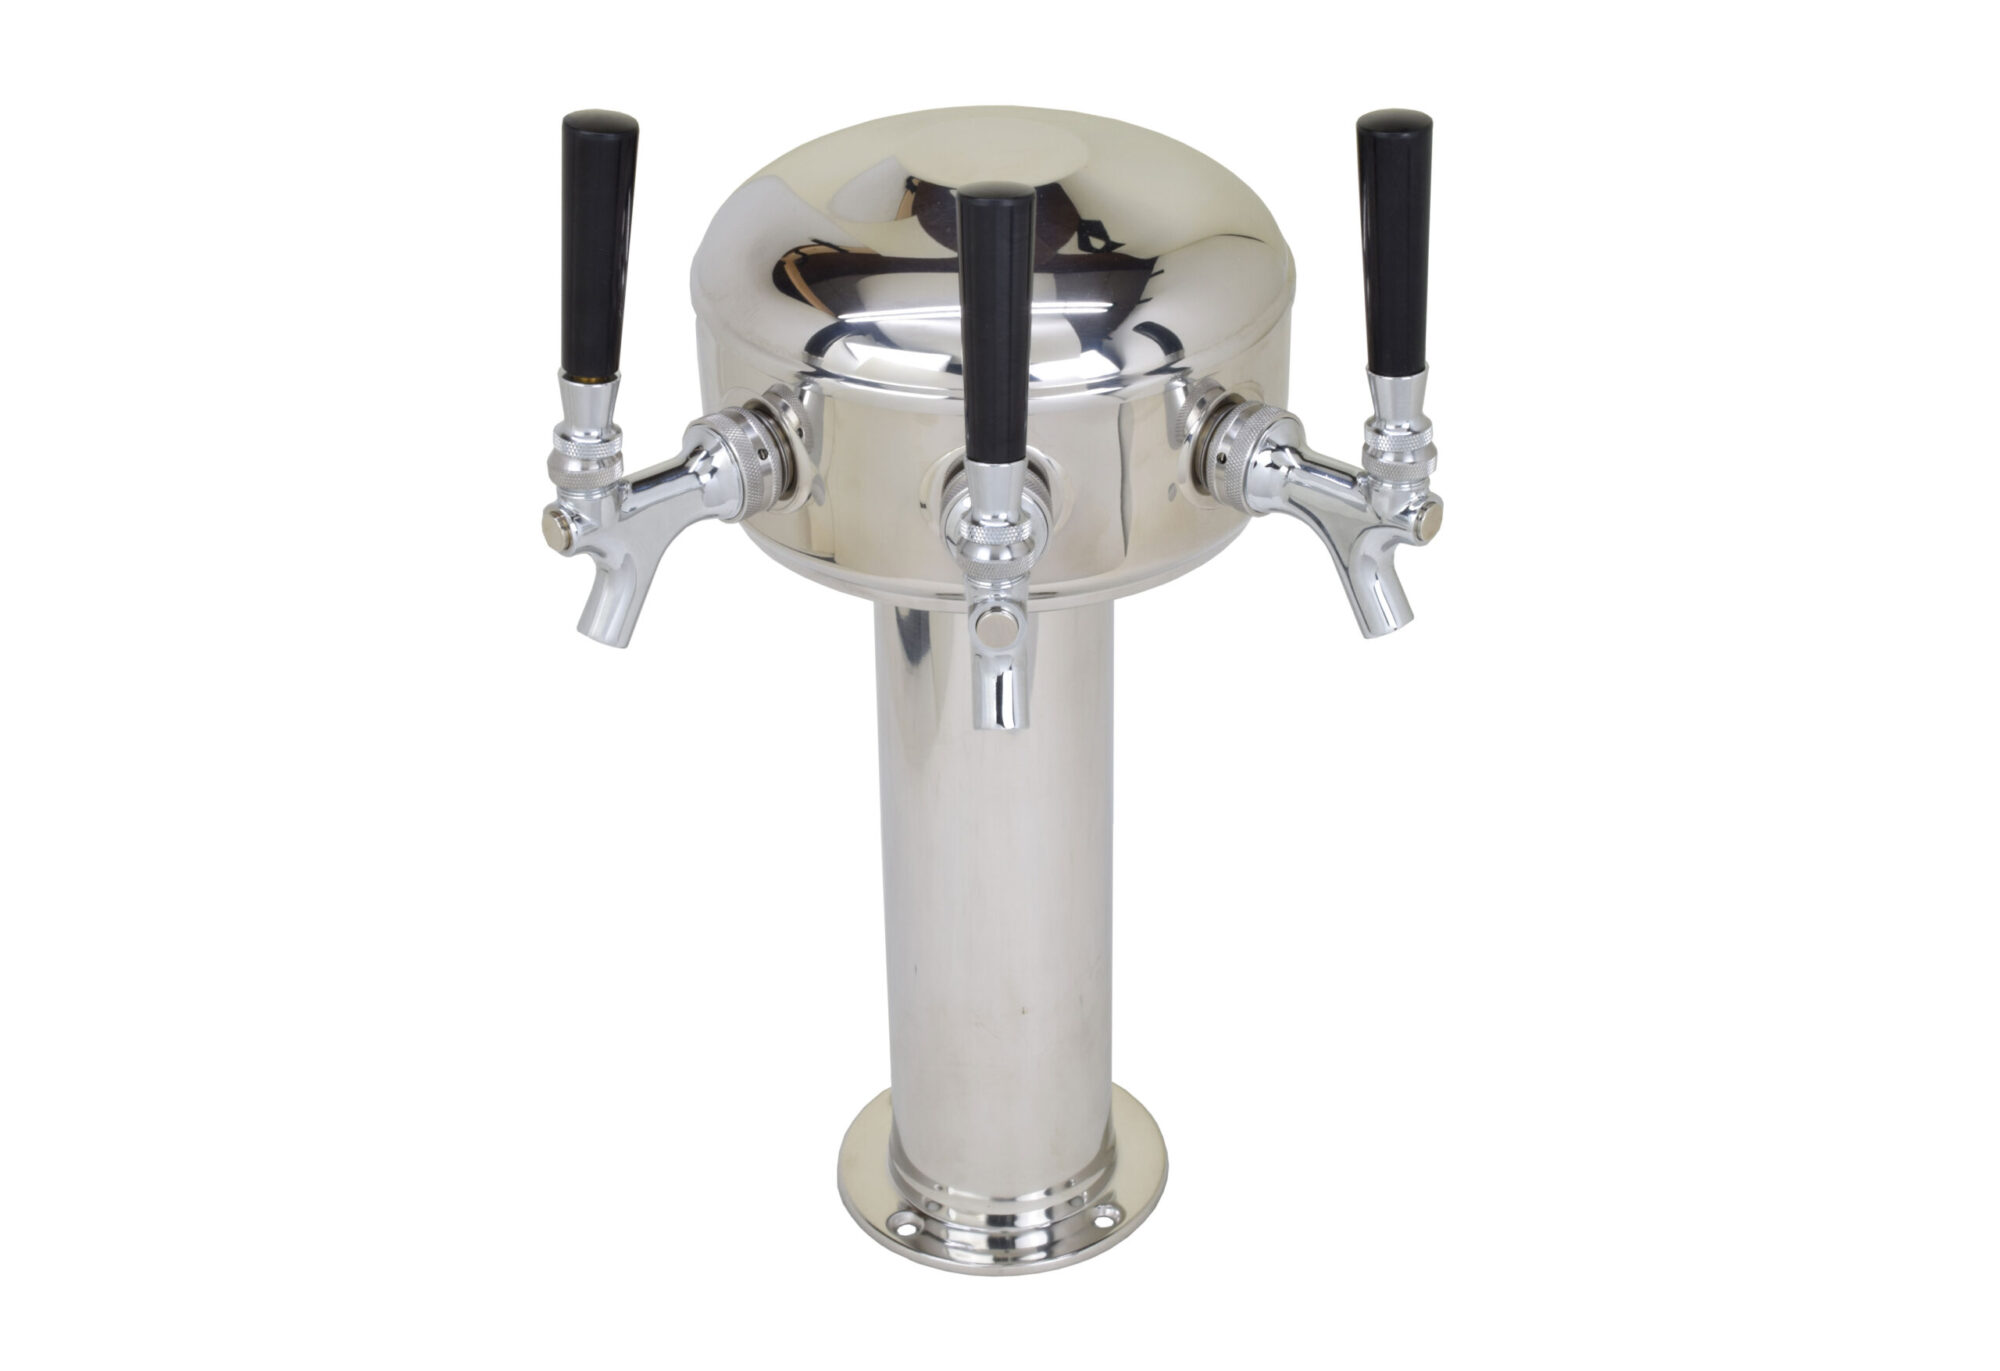 626CG-3 Three Faucet Mini Mushroom Tower with Chrome Plated Faucets and Shanks - Glycol Ready